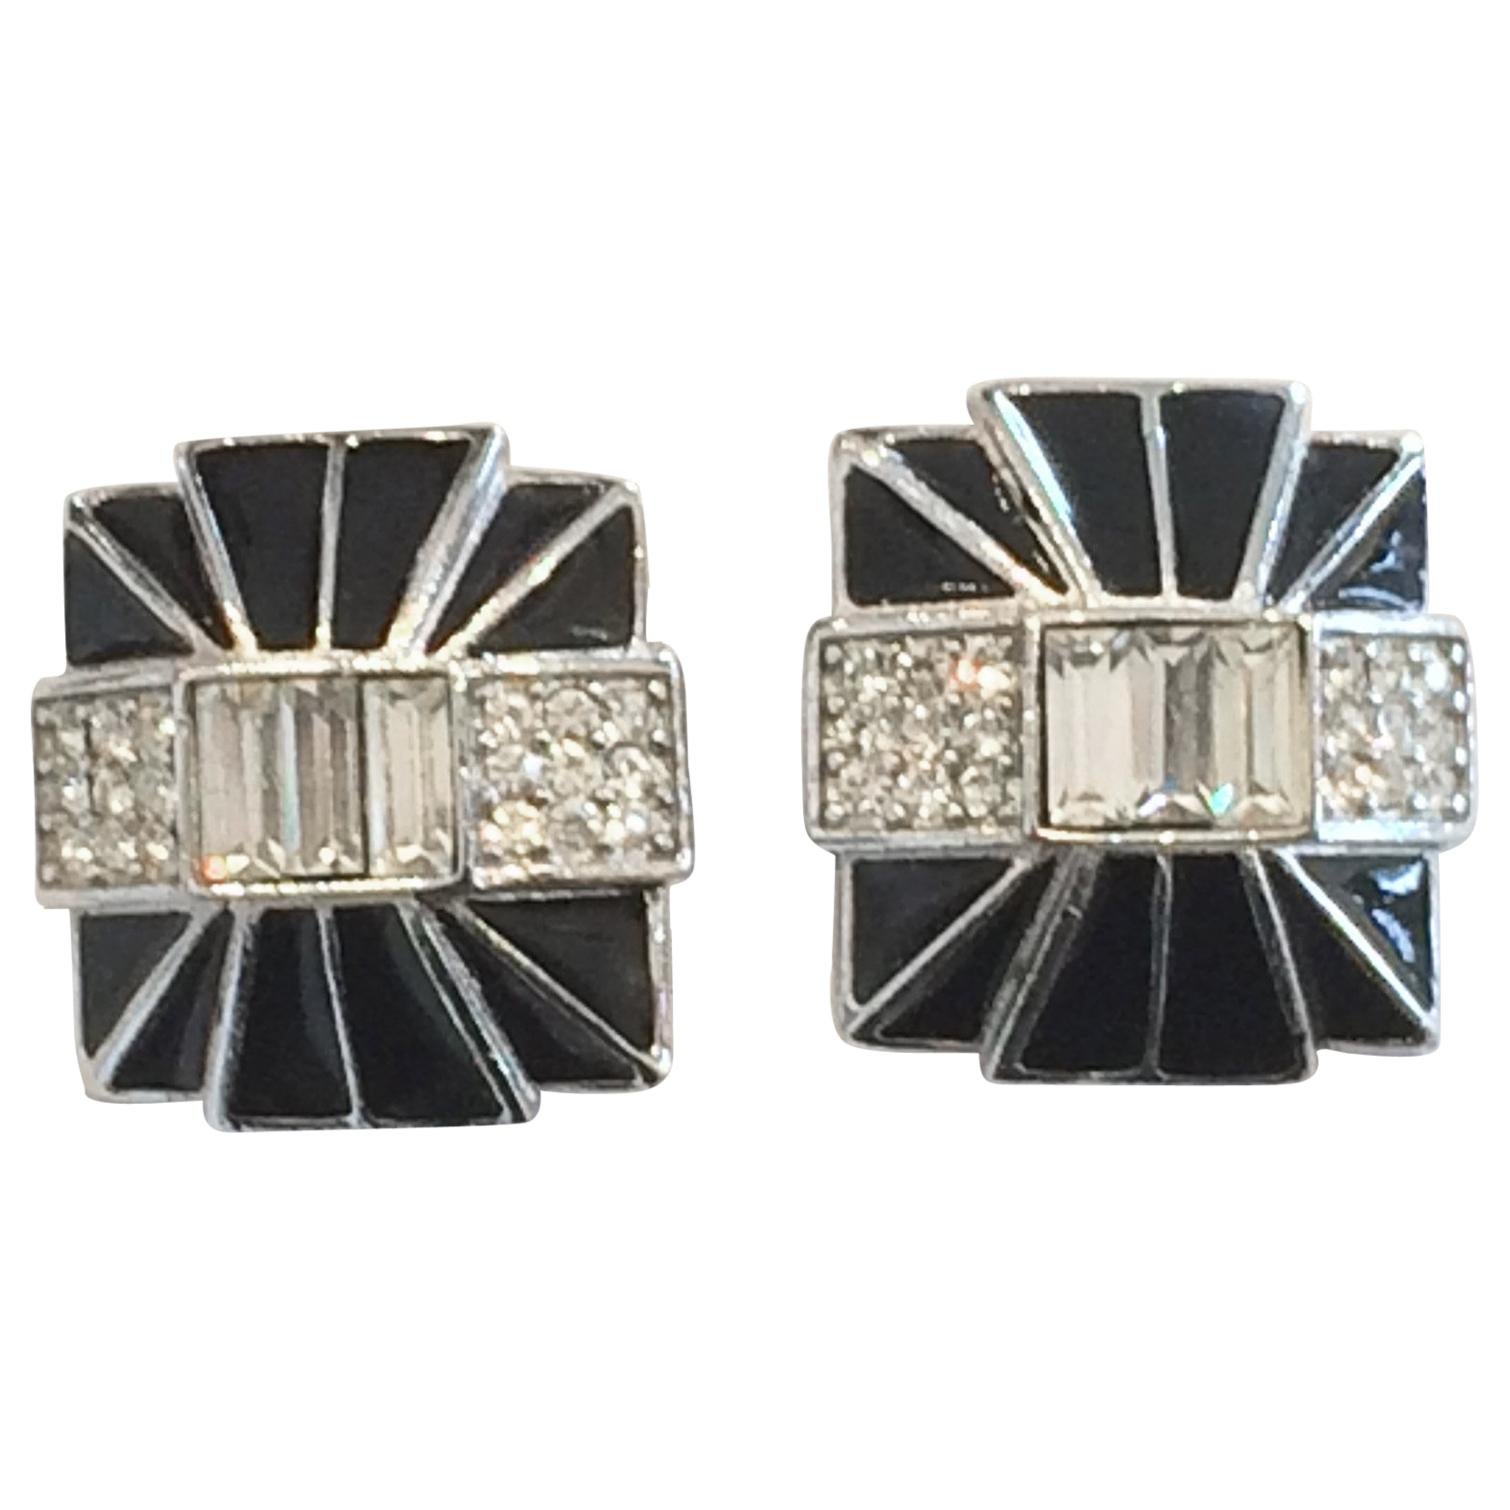 Art Deco Revival Clip earrings by Givenchy